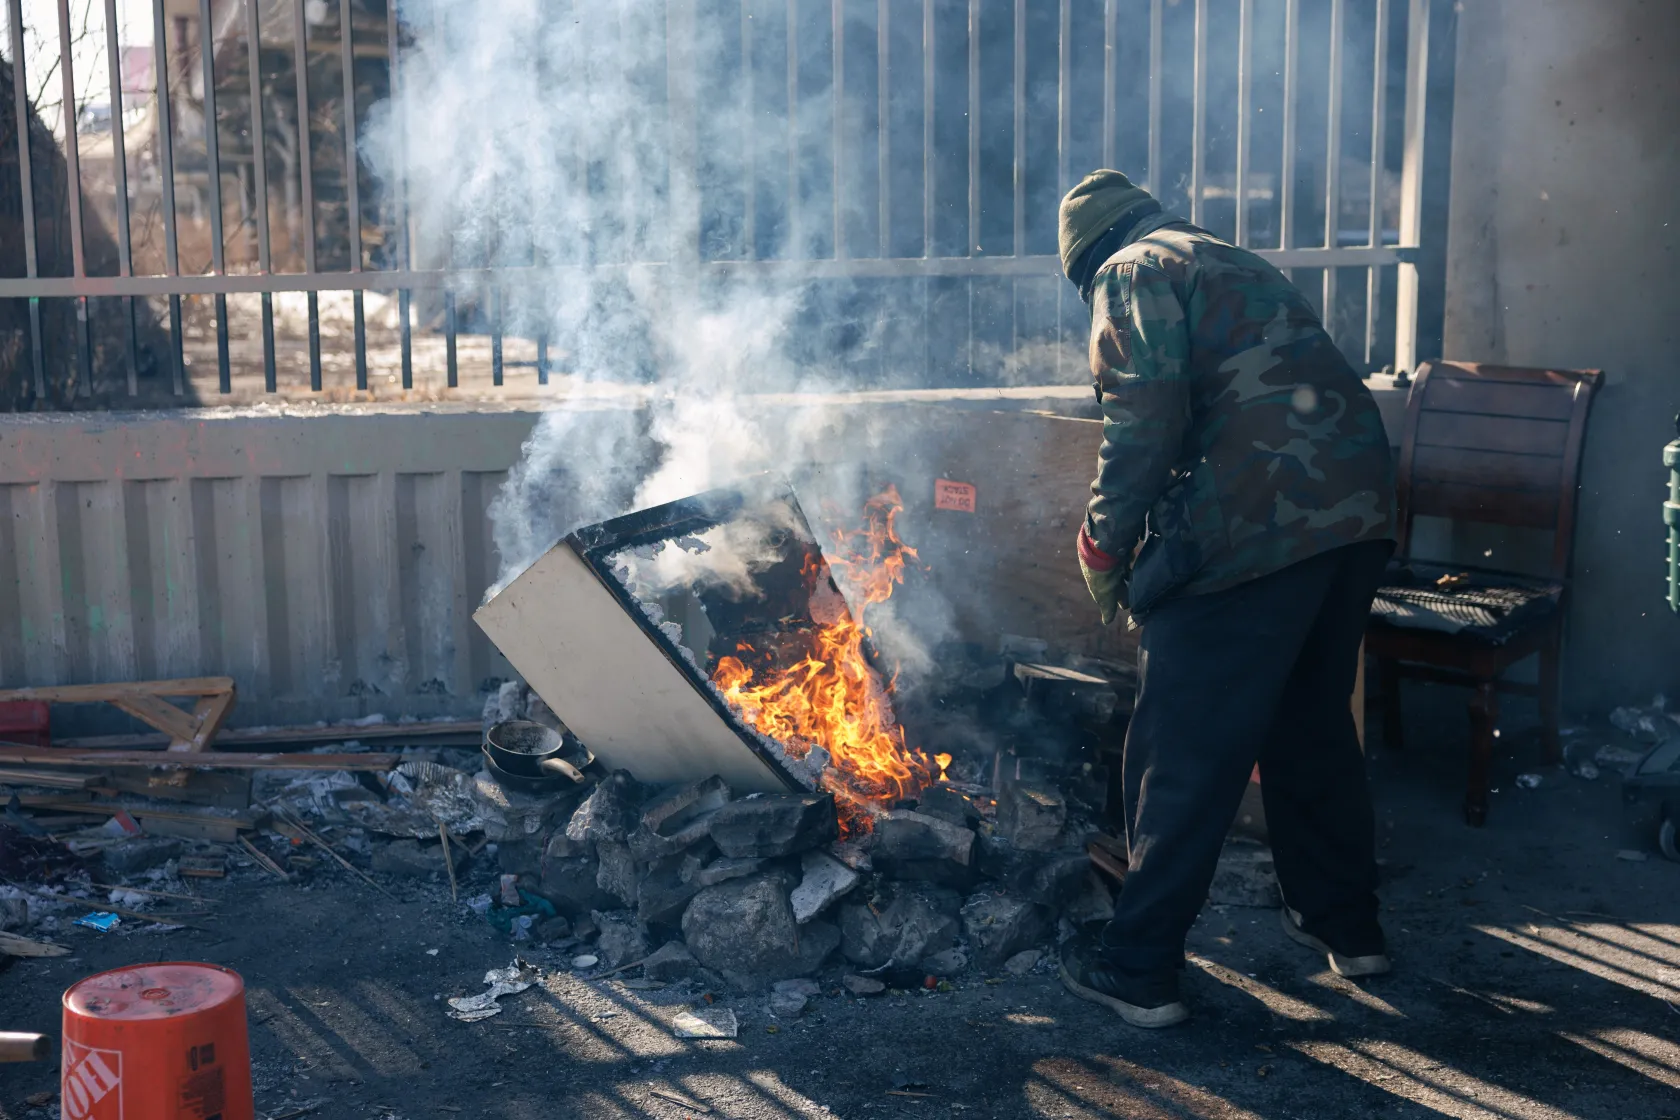 A man in a heavy parka warms himself by a trash fire.